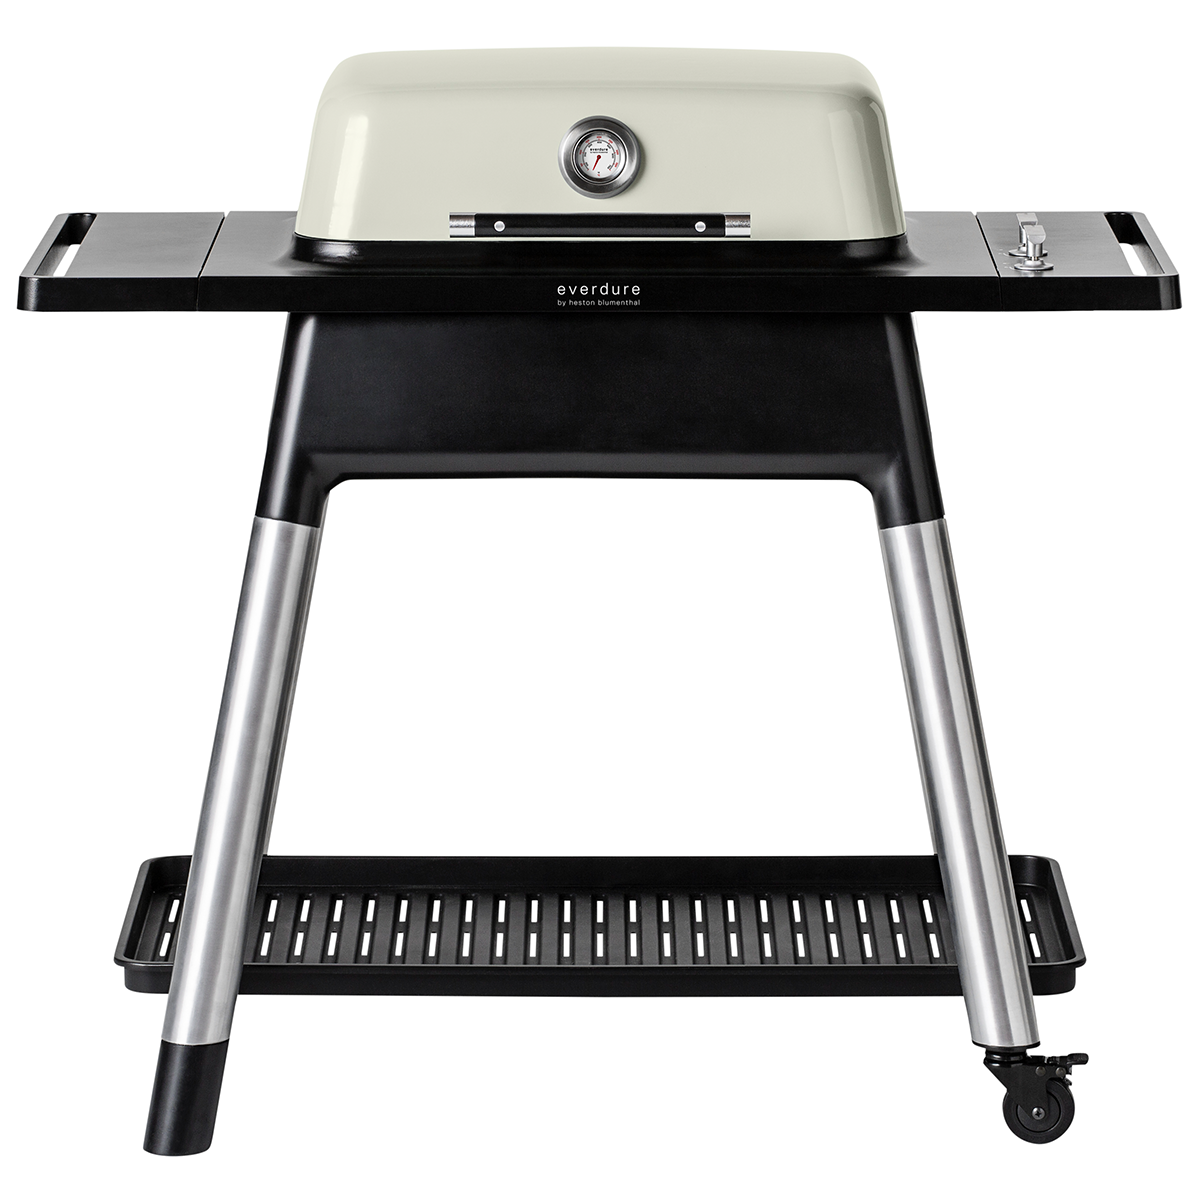 EVERDURE FORCE GASGRILL INKL/COVER GEN 2 - STONE